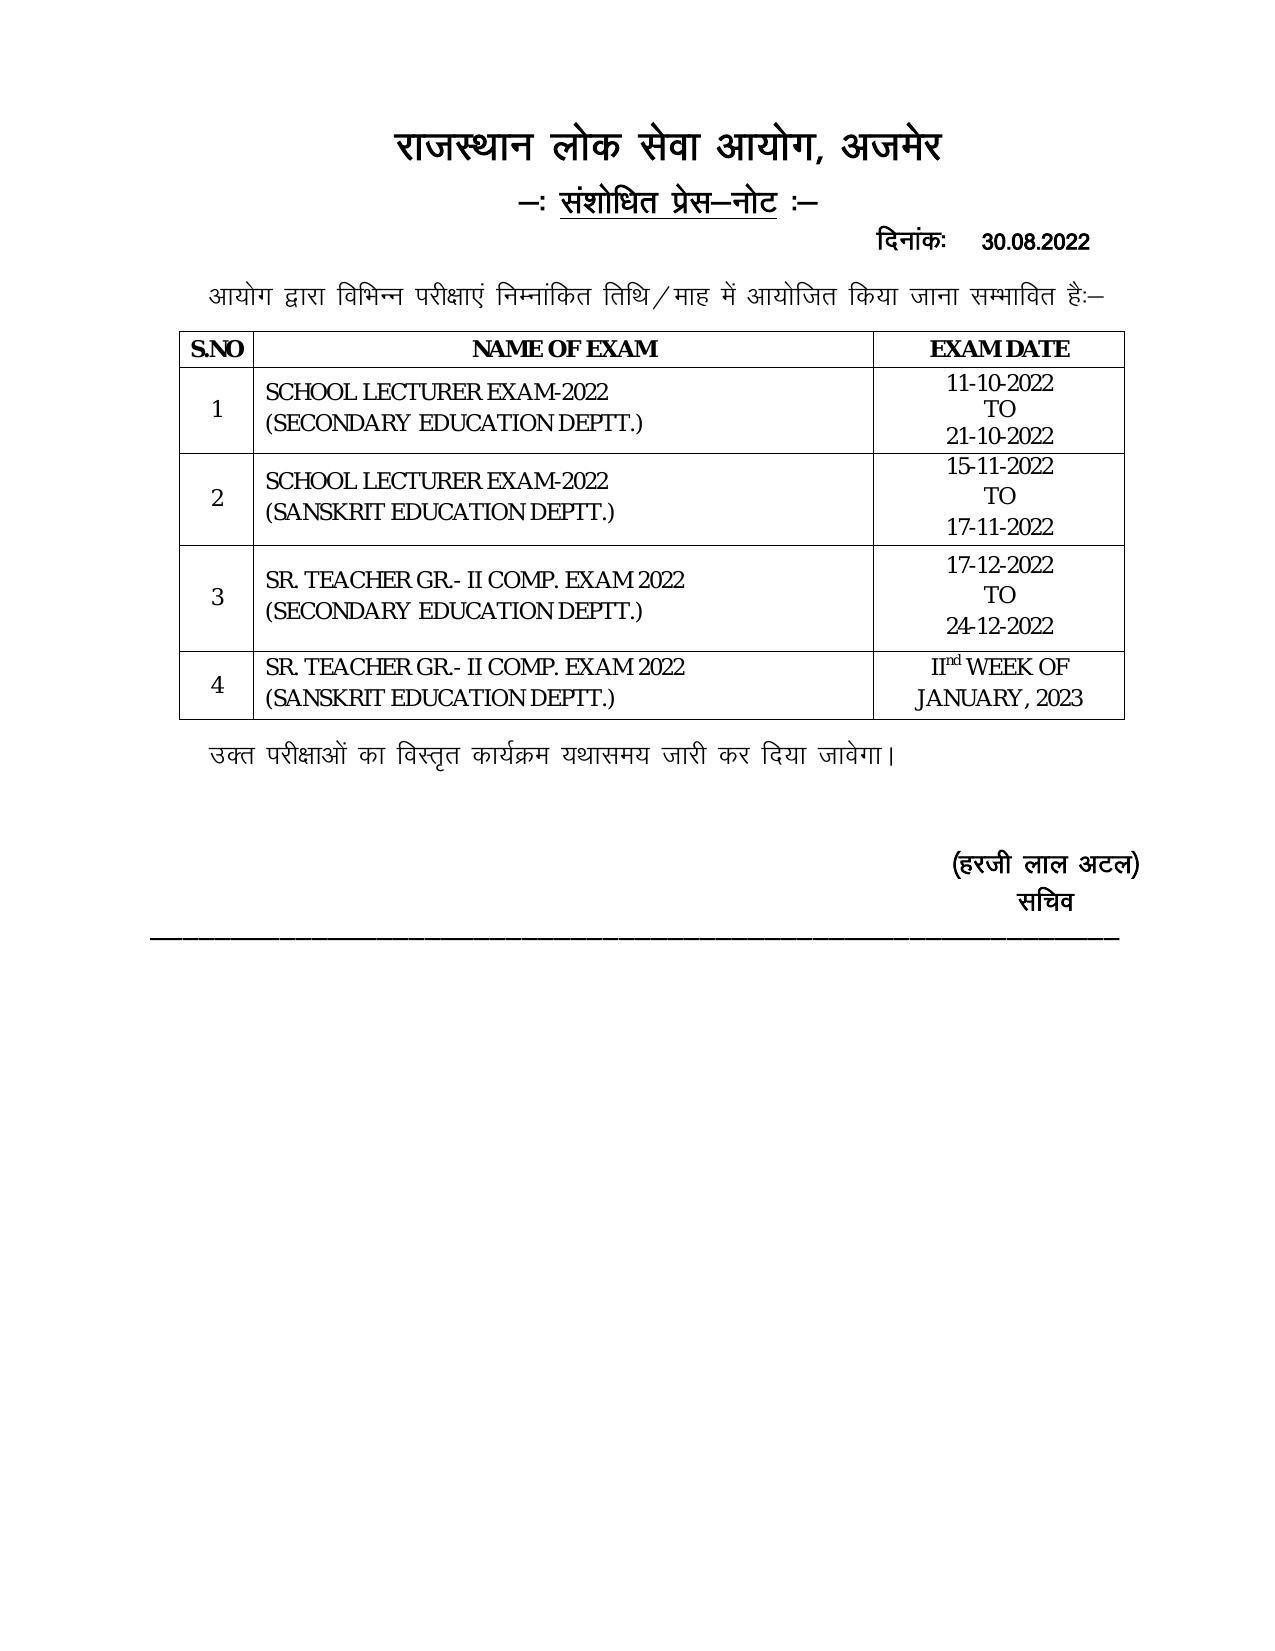 RPSC School Lecturer PGT Exam Date 2022 - Exam Date Announced - Page 1